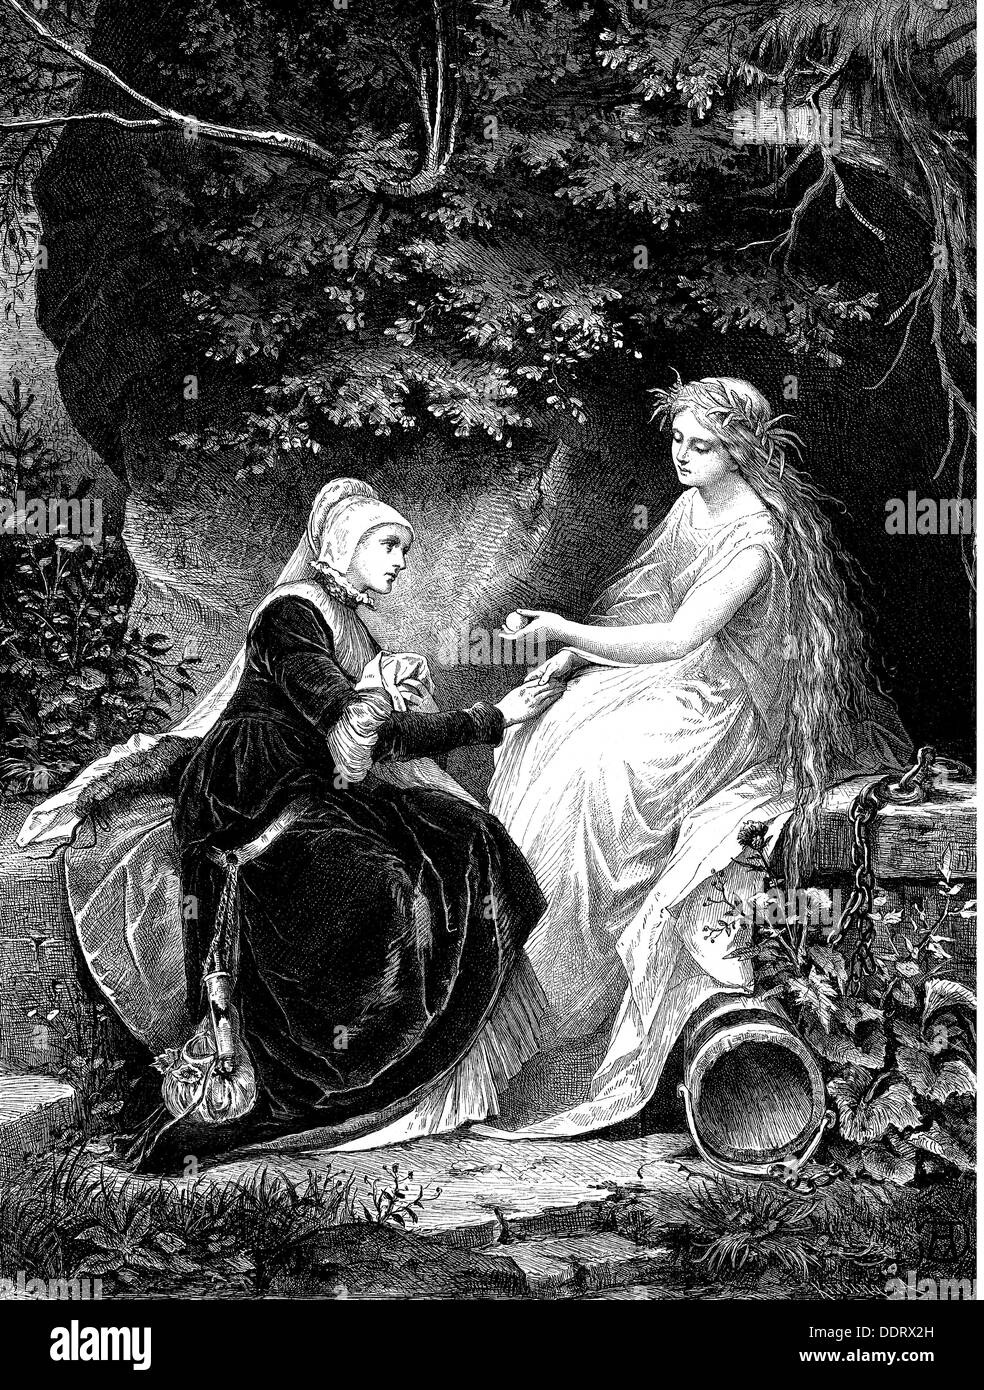 literature, fairy tales, 'The Nymph of the Fountain' by Johann Karl August Musäus (1735 - 1787), wood engraving by Adolf von Grundherr (1848 - 1902), 19th century, Additional-Rights-Clearences-Not Available Stock Photo